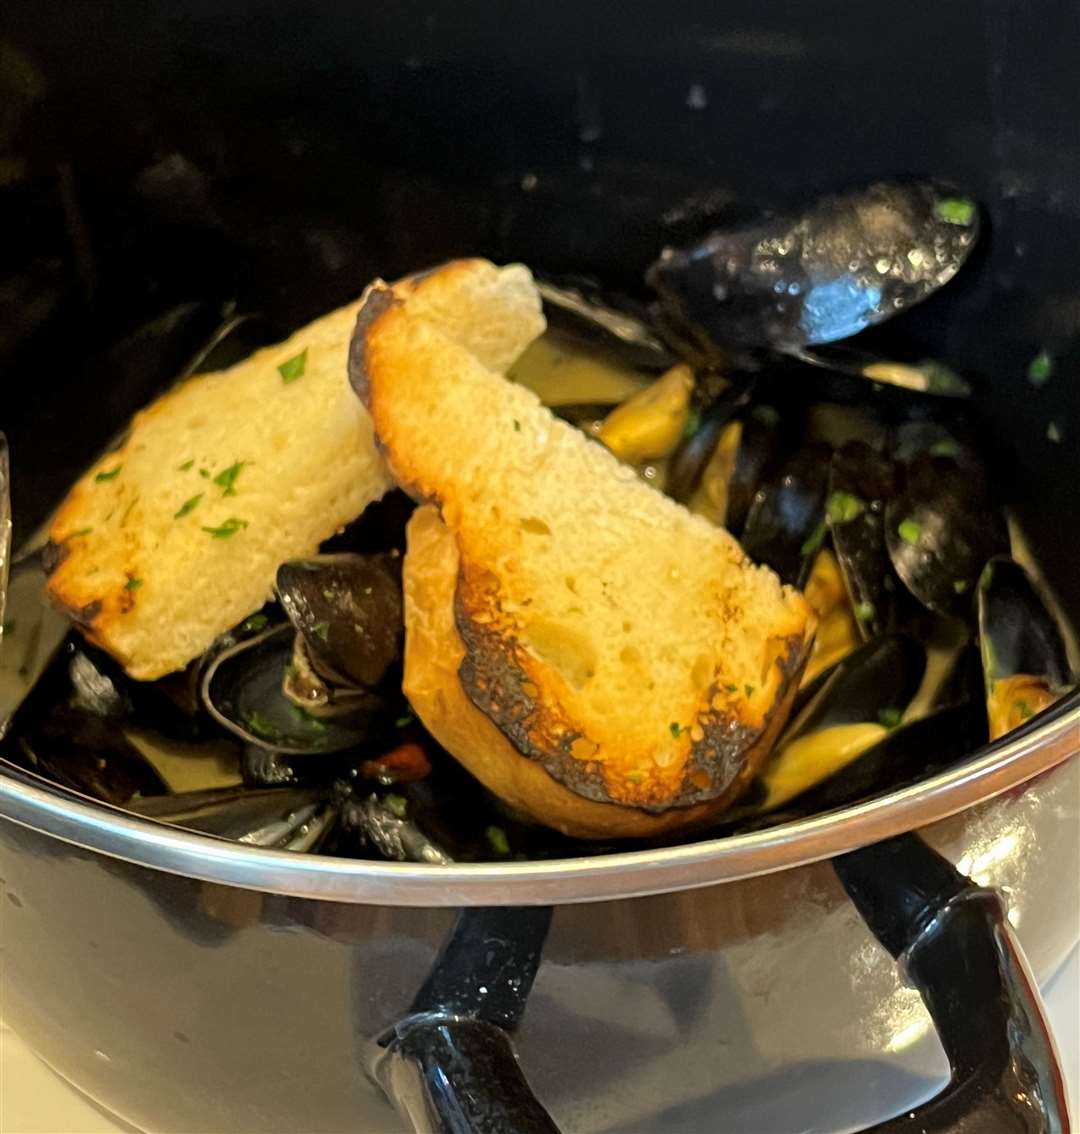 The mussels came with some slightly singed garlic bread